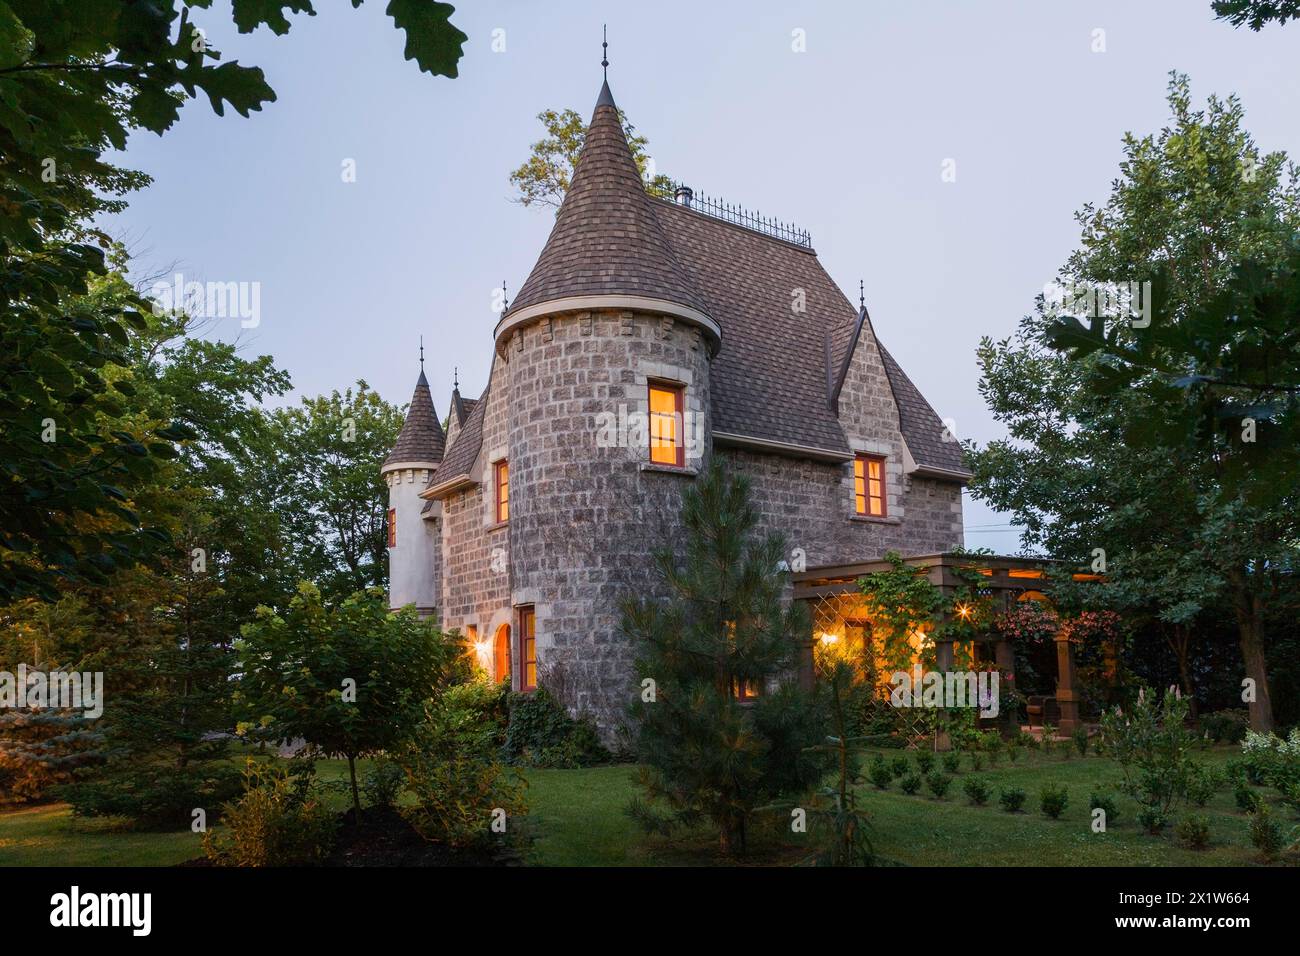 2006 reproduction of a 16th century grey stone and mortar Renaissance castle style residential home facade at dusk in summer, Quebec, Canada Stock Photo